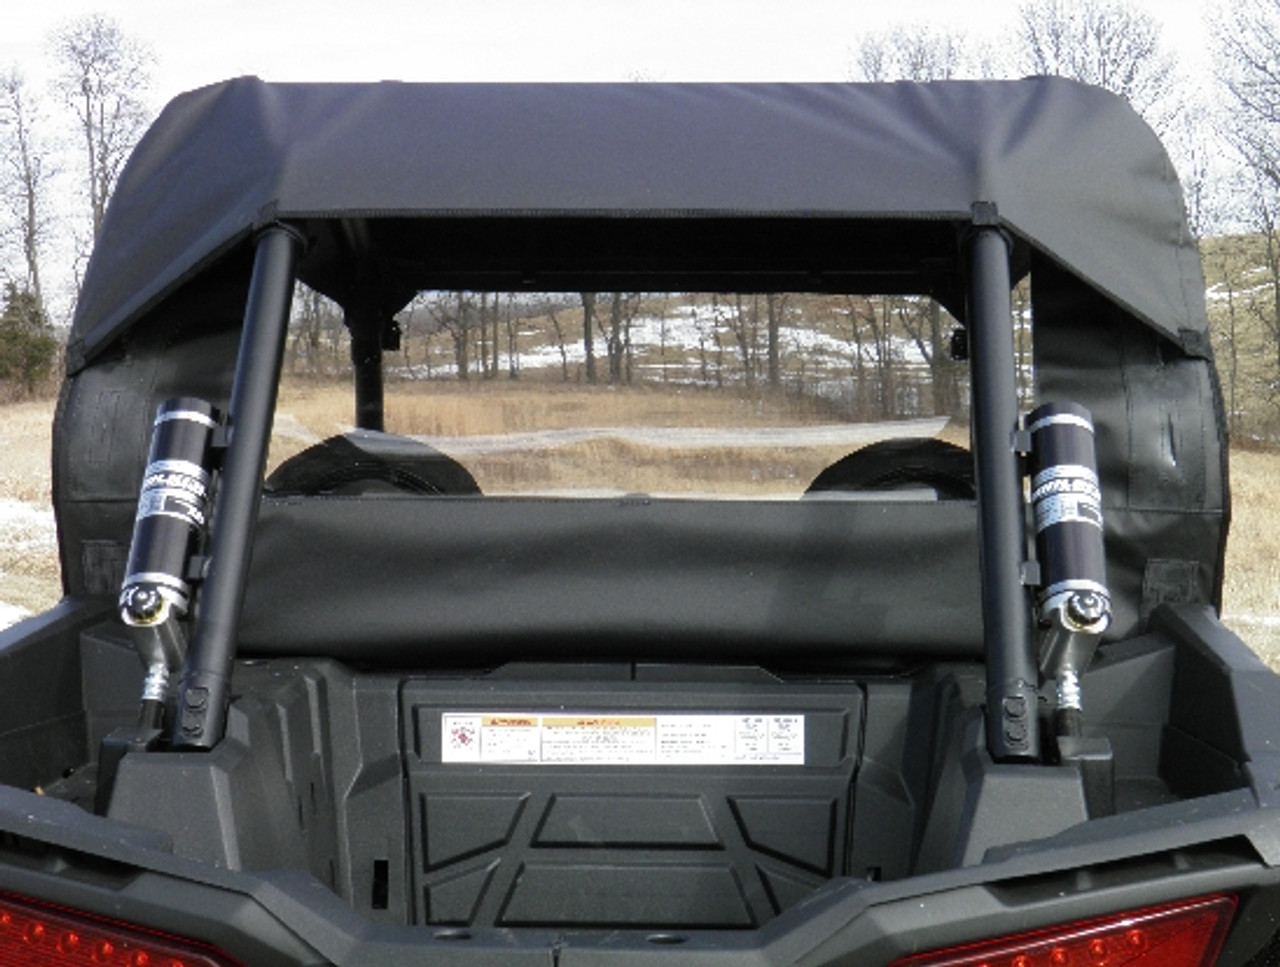 3 Star side x side Polaris RZR 900/1000 Full Cab Enclosure for Hard Windshield Rear View